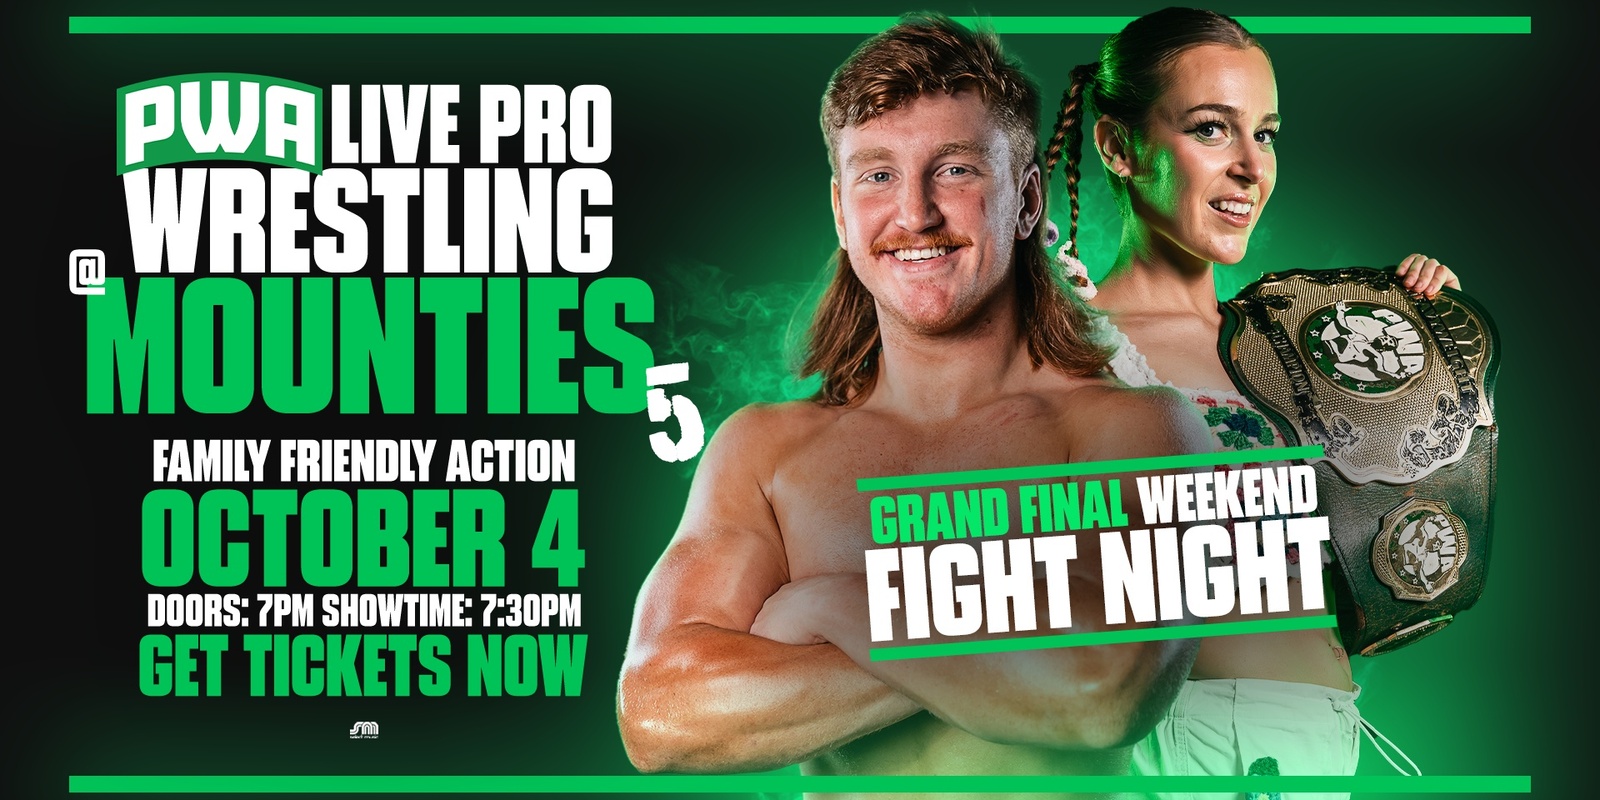 Banner image for PWA Live Pro Wrestling @ Mounties #5